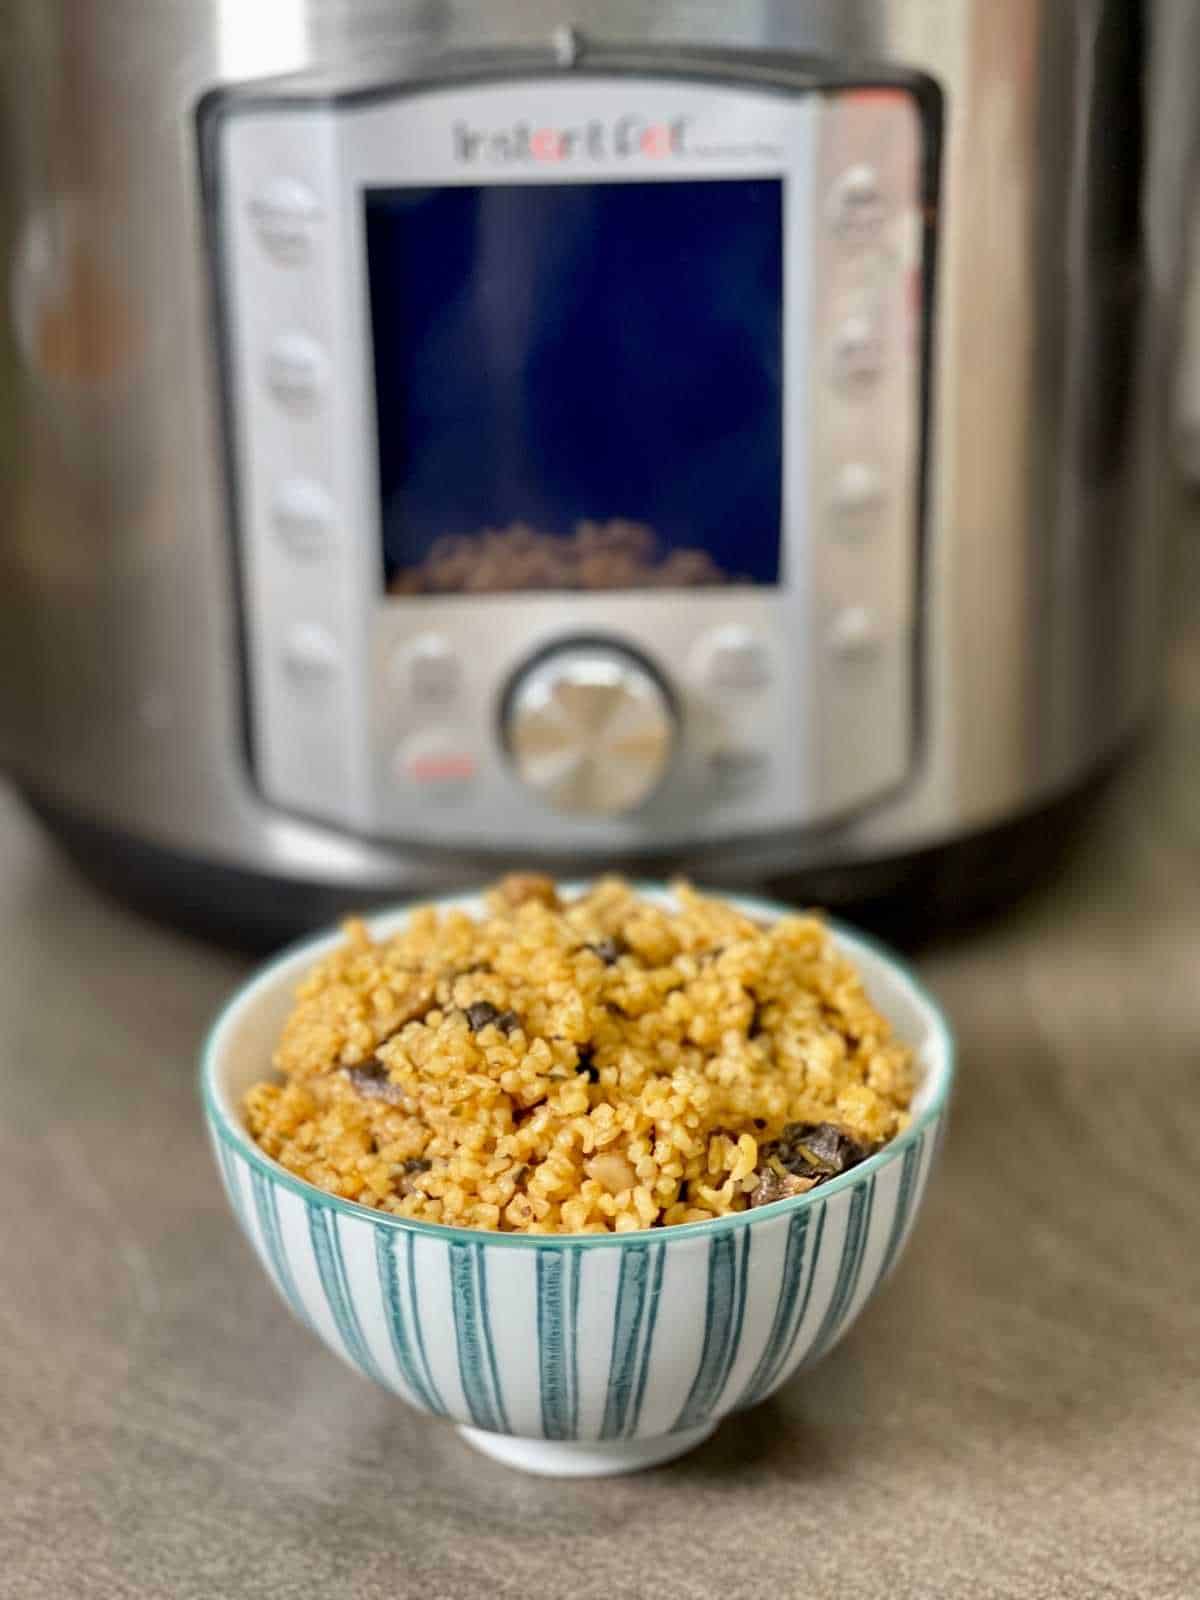 Pressure cooked mushroom bulgar whear with Instant Pot Duo Evo Plus in the background